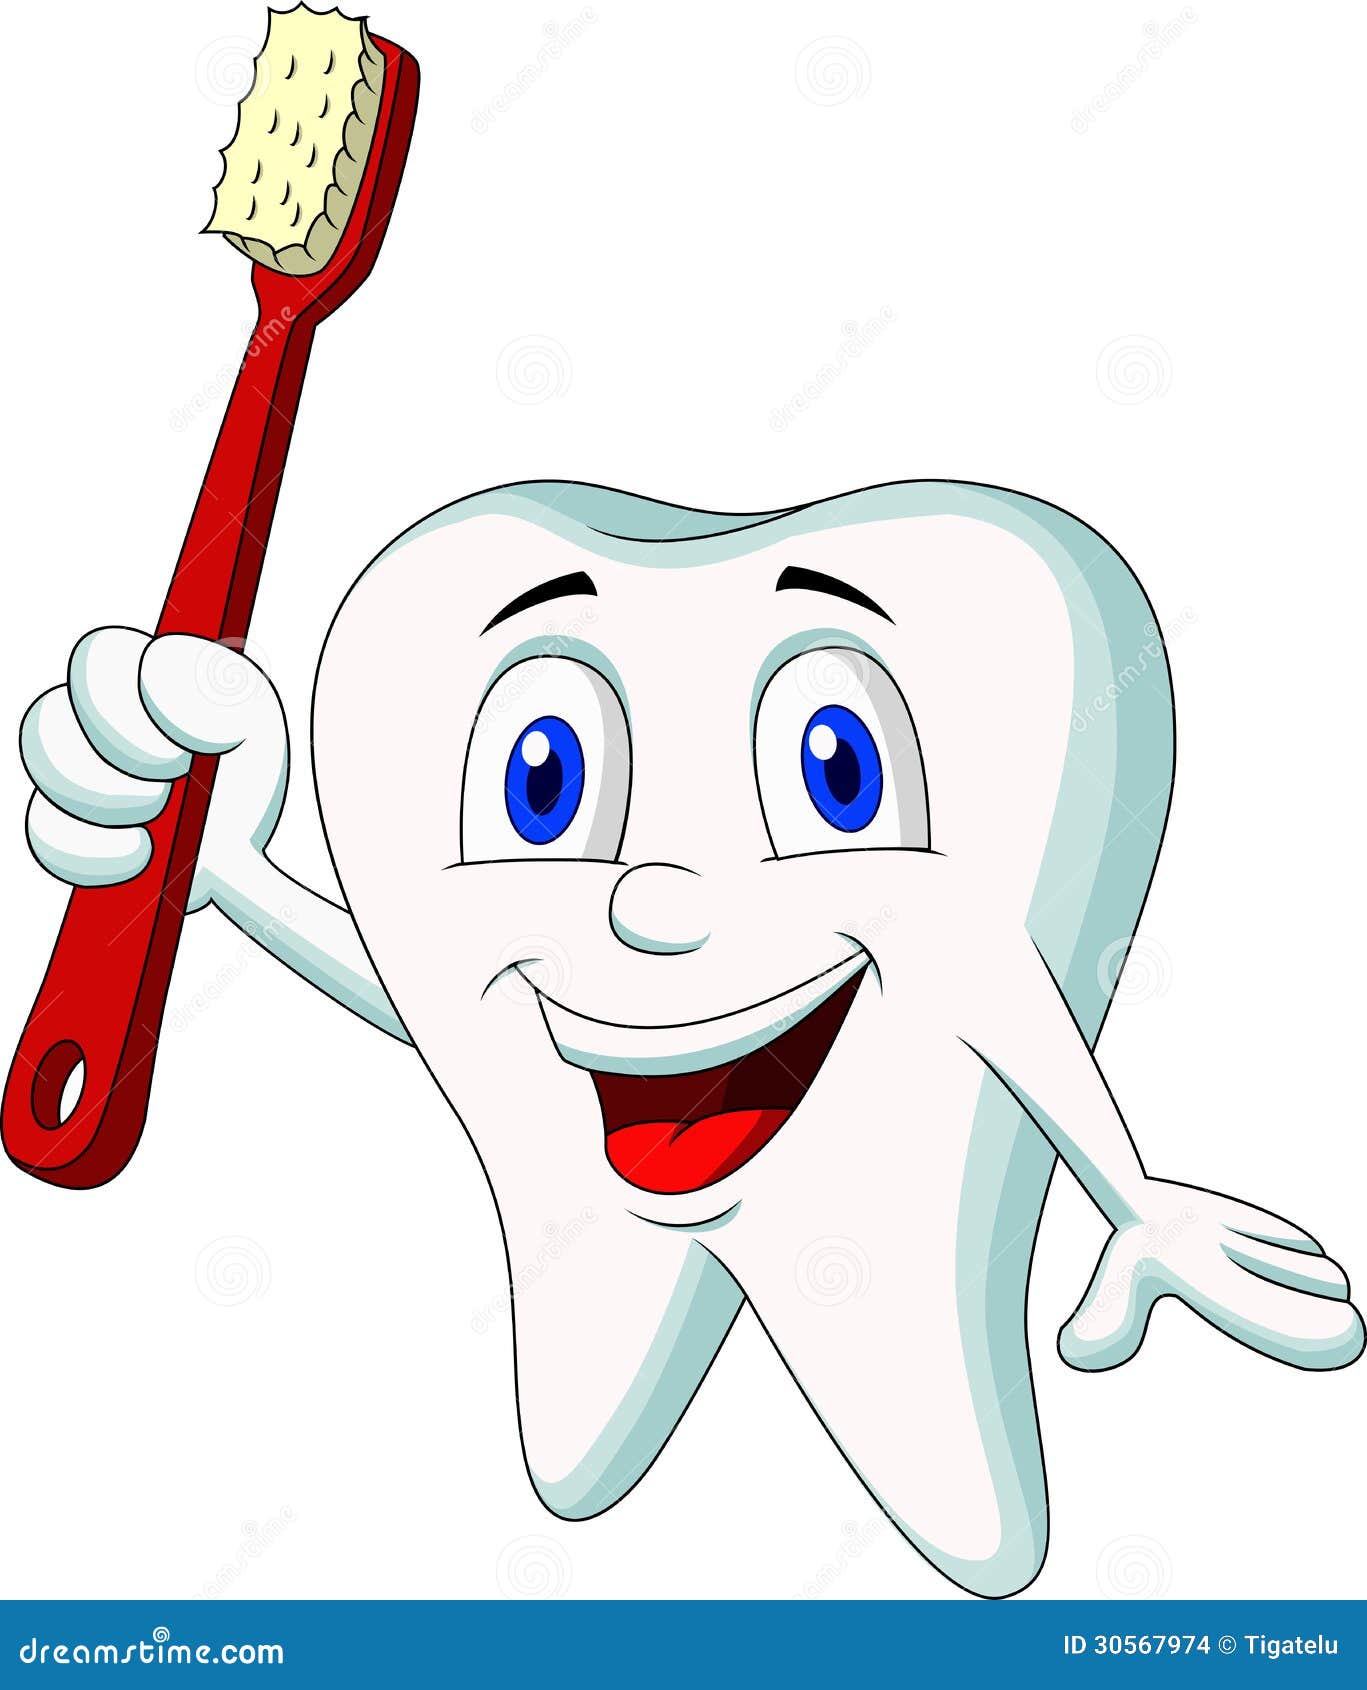 Cute Tooth Cartoon Holding Tooth Brush Stock Images 